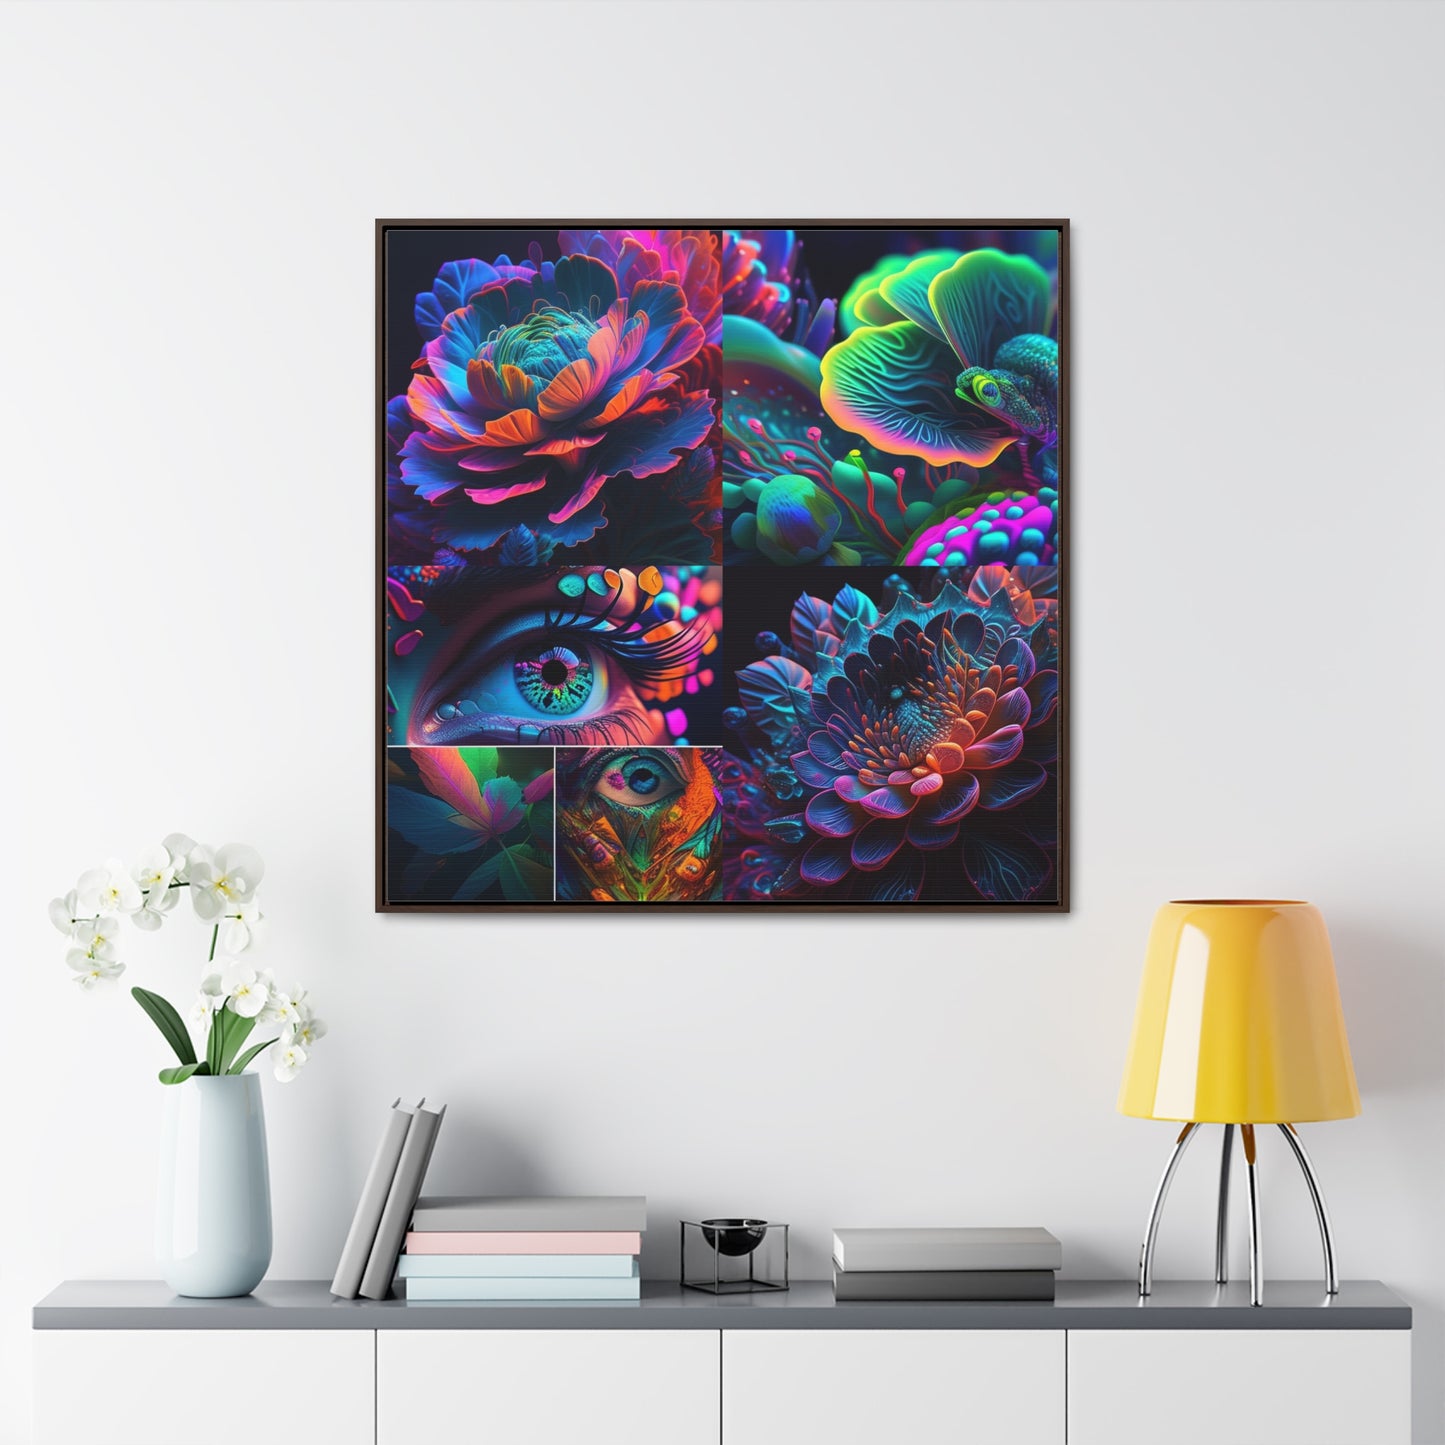 Gallery Canvas Wraps, Square Frame Neon Florescent Glow